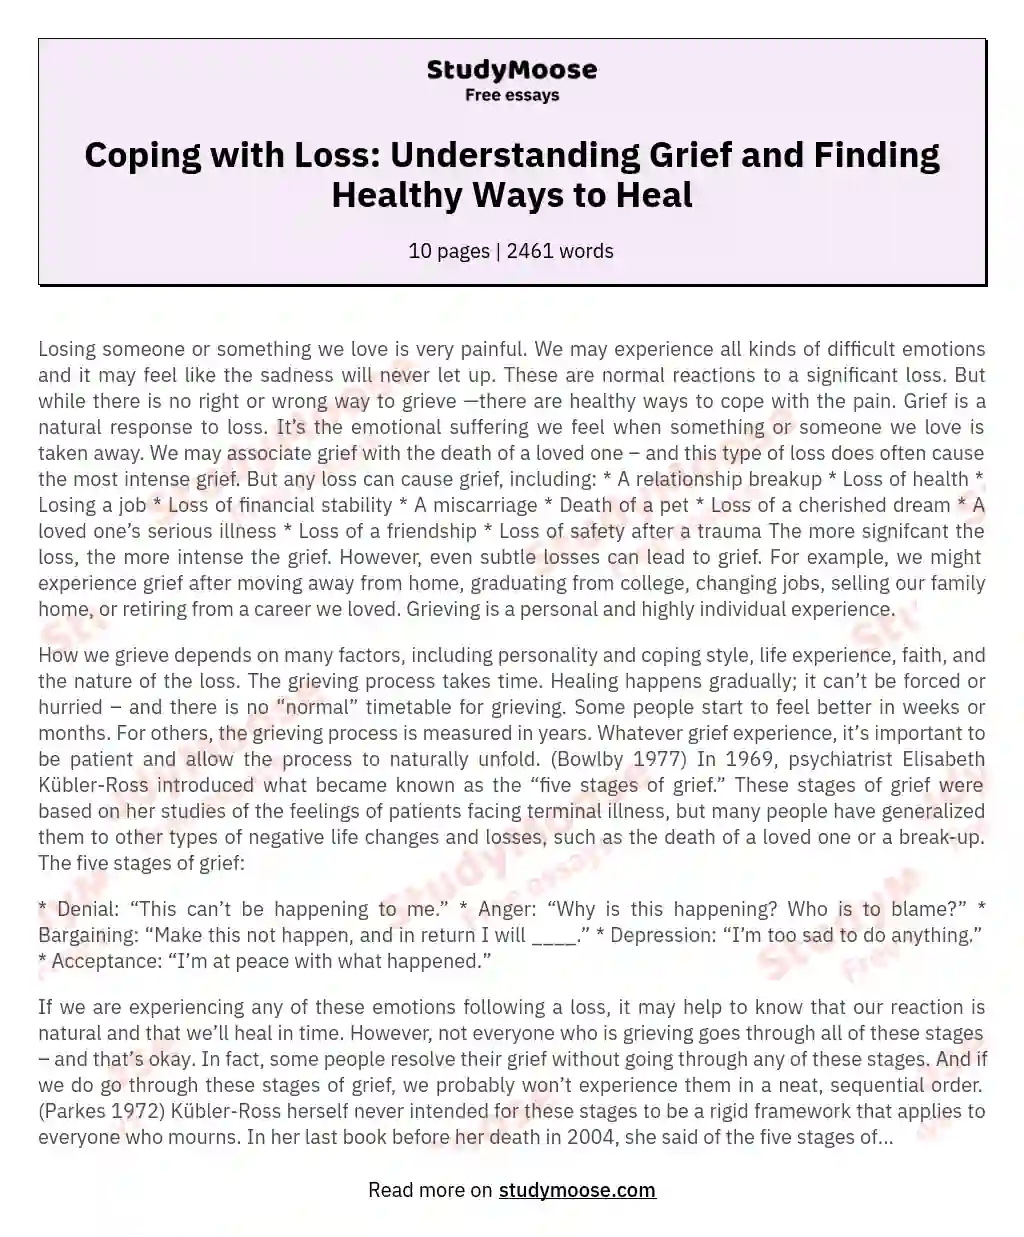 Grief and Loss